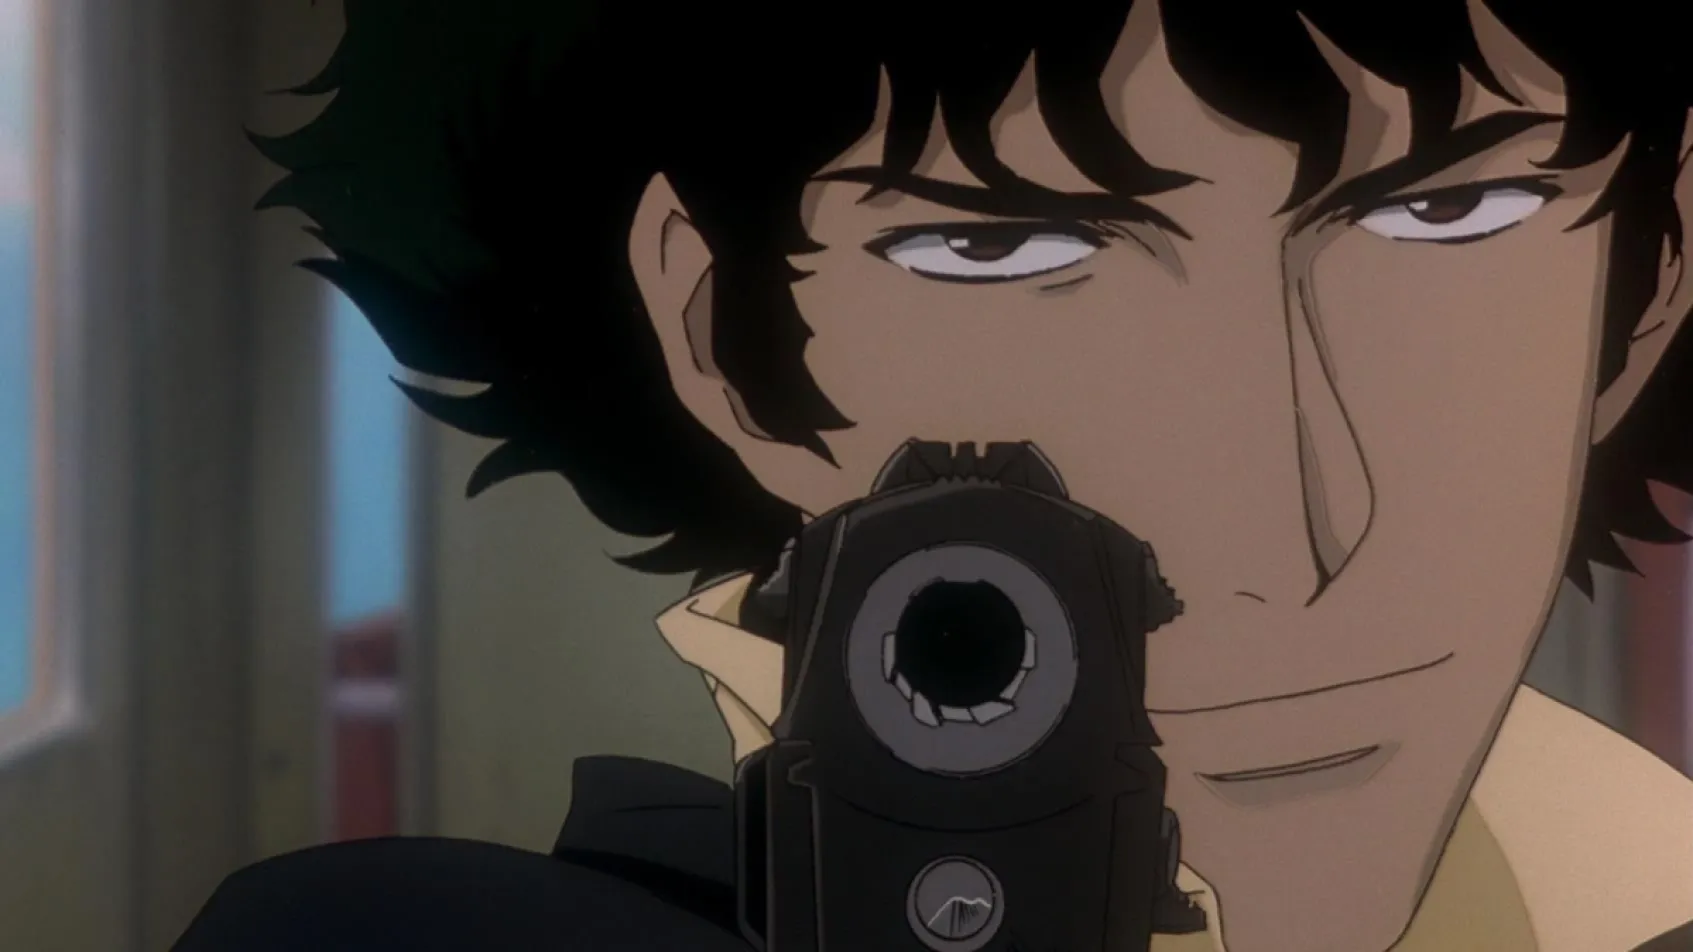 Spike from the anime Cowboy Bebop